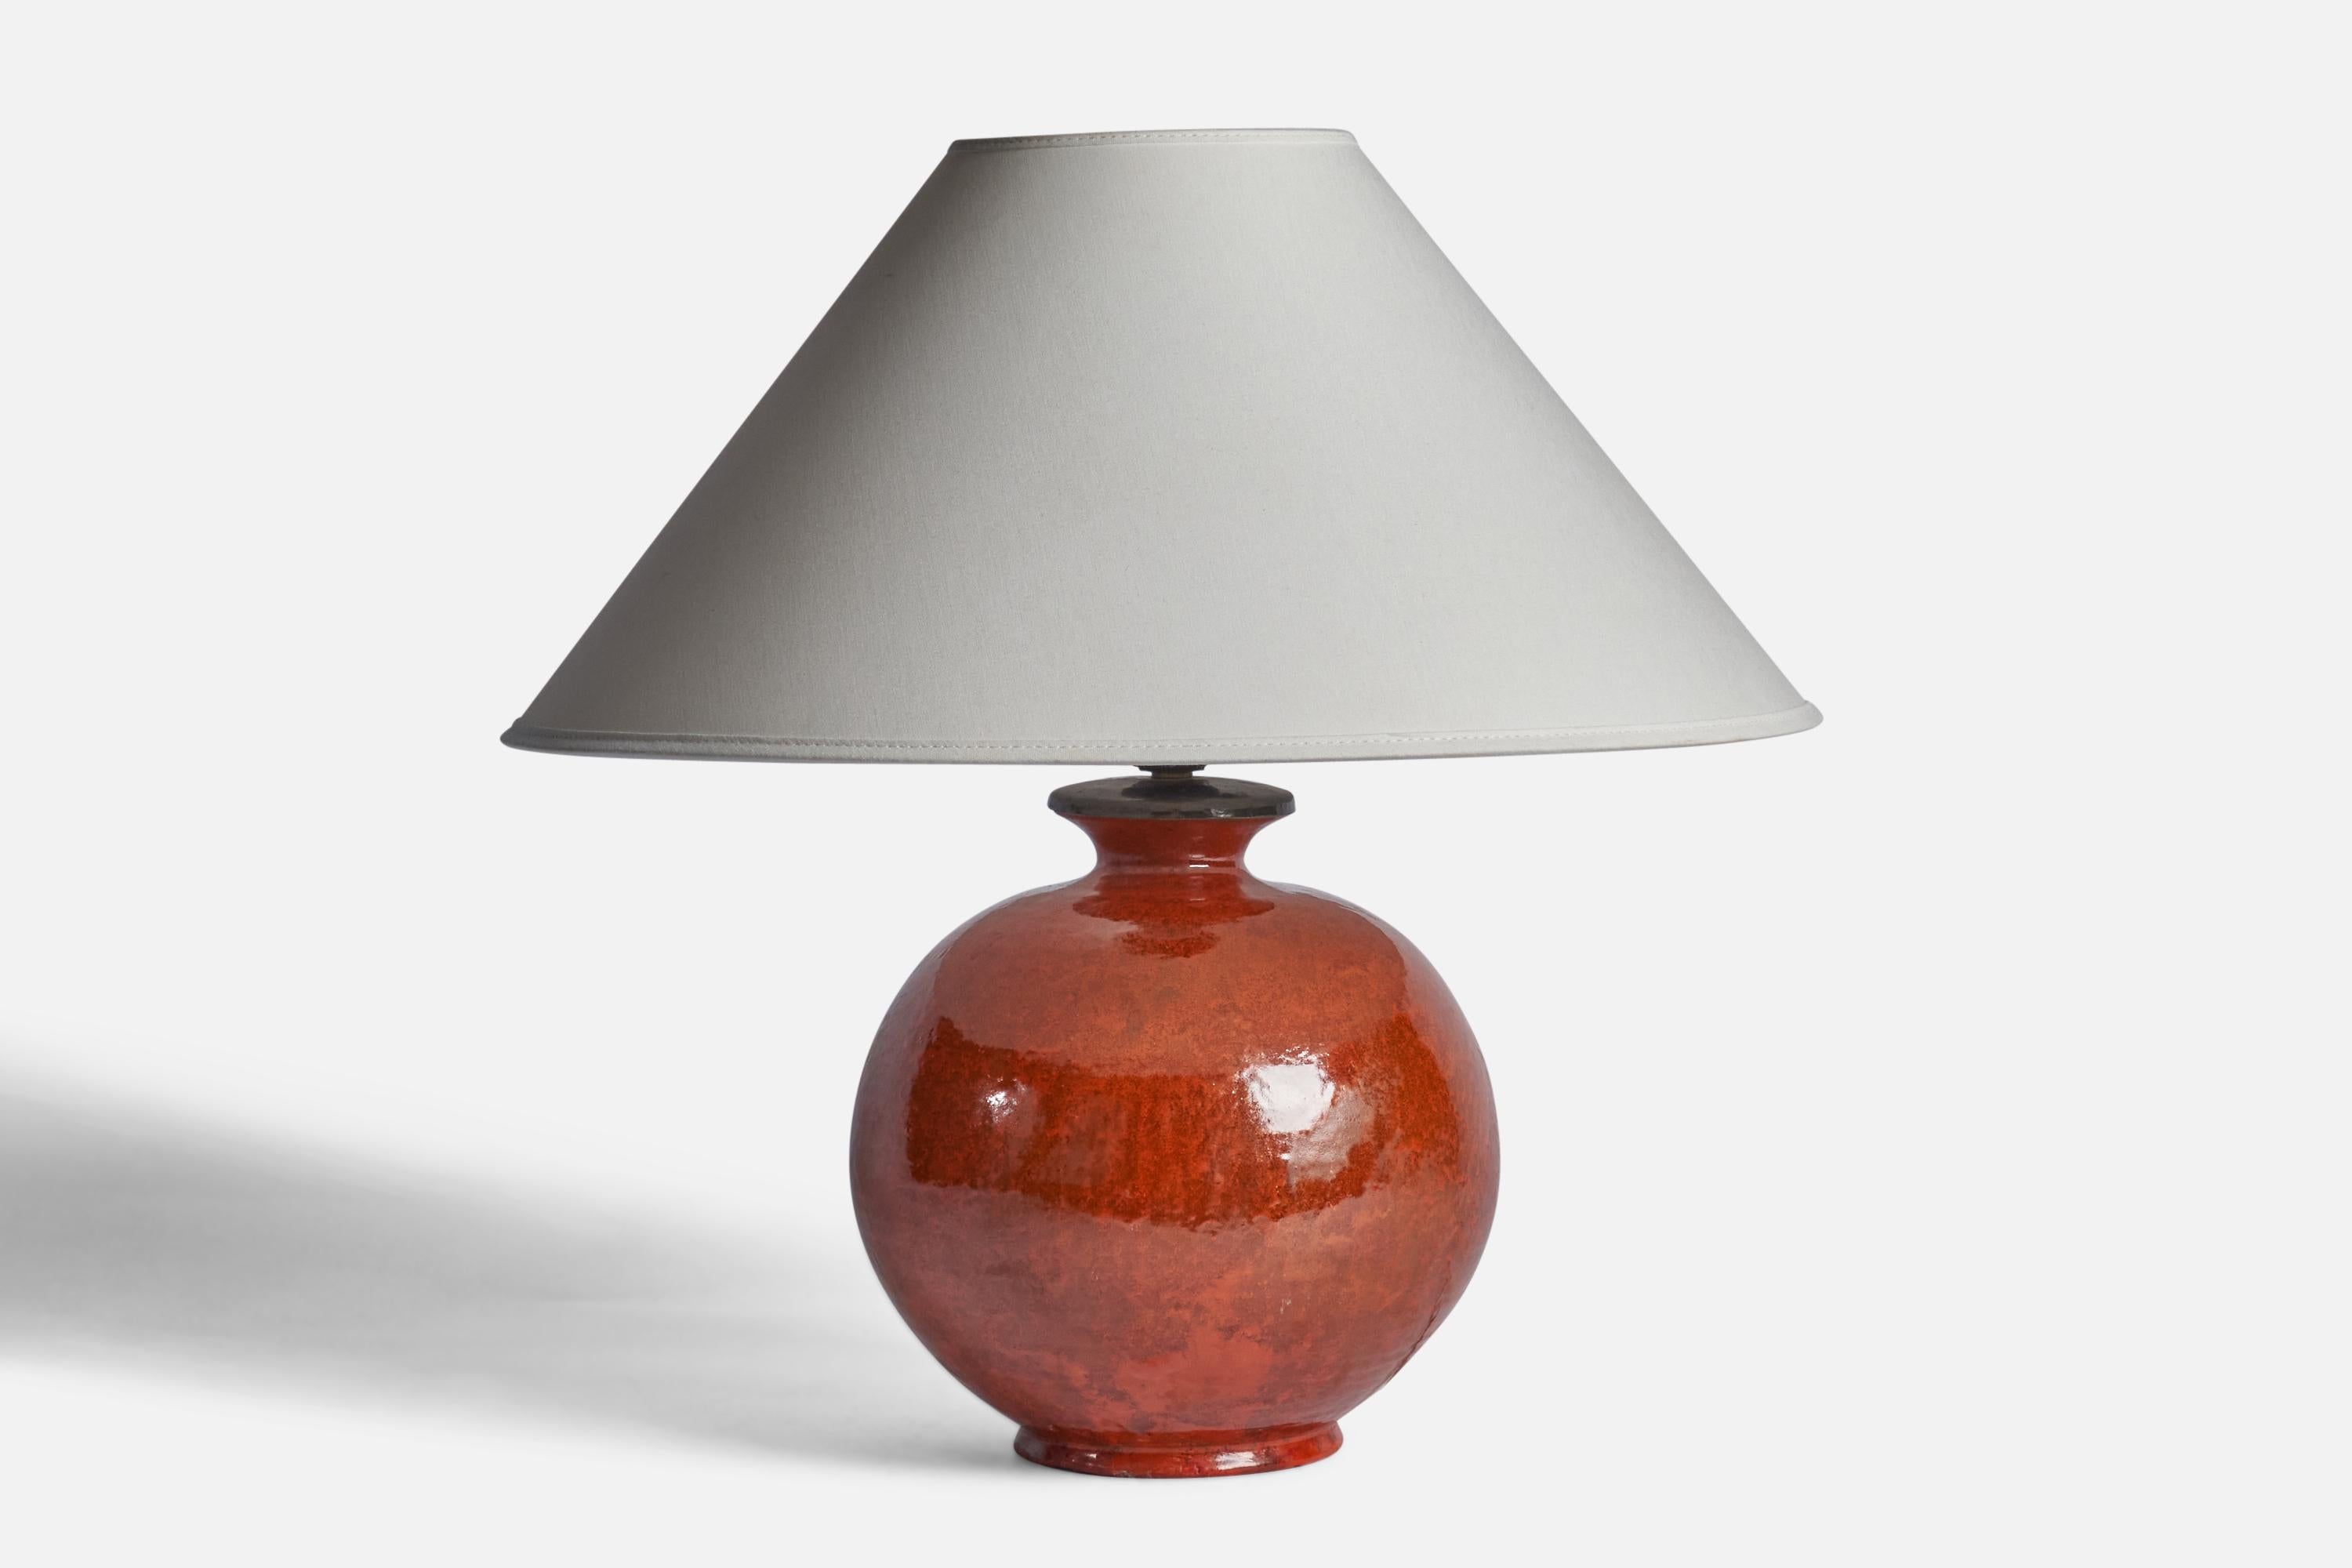 An red-glazed earthenware table lamp designed and produced by Upsala Ekeby, 1930s. 

Dimensions of Lamp (inches): 11.5” H x 8” Diameter
Dimensions of Shade (inches): 4.5” Top Diameter x 16” Bottom Diameter x 9” H 
Dimensions of Lamp with Shade